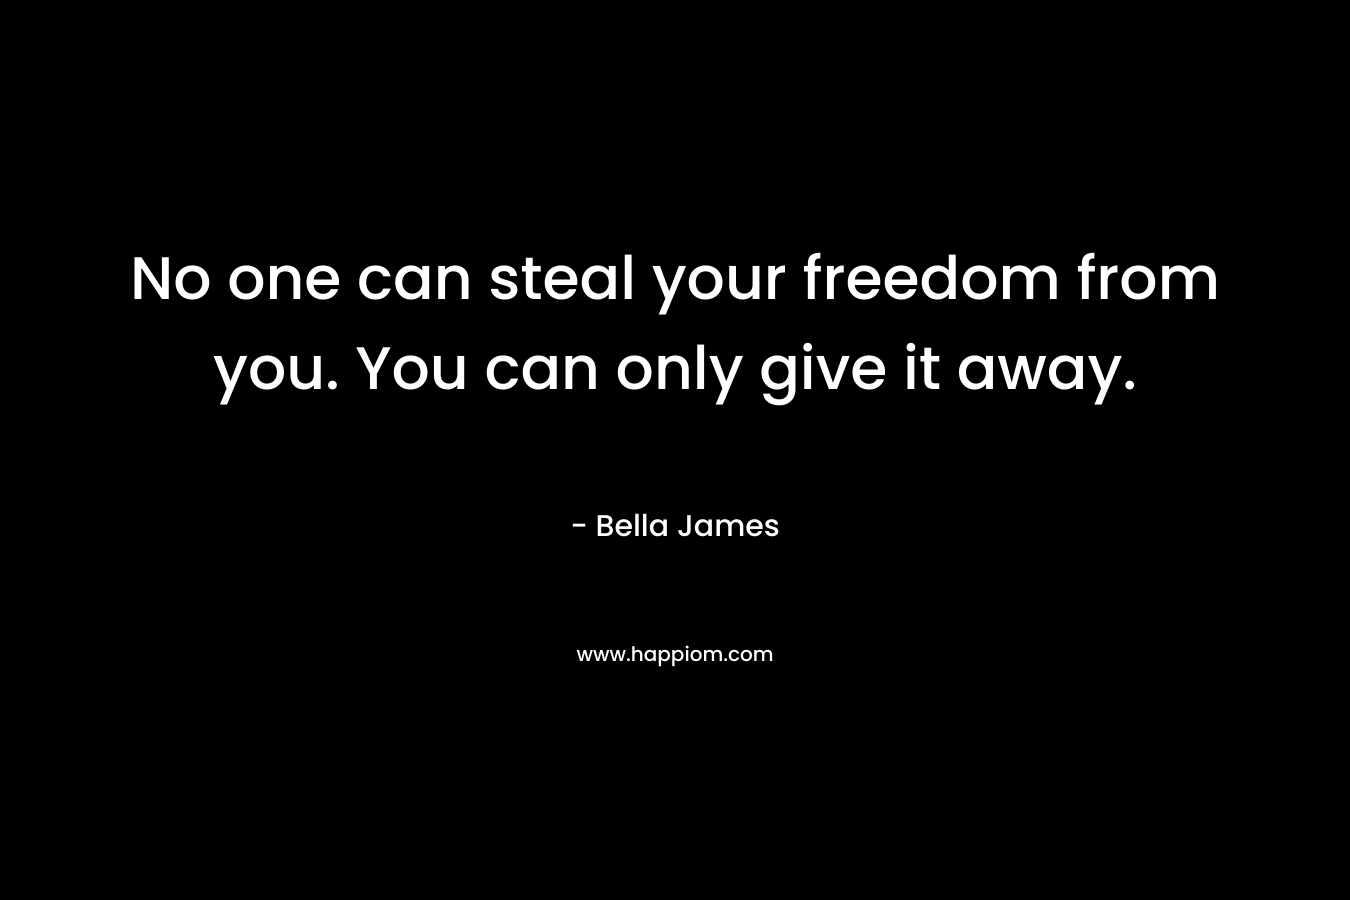 No one can steal your freedom from you. You can only give it away.